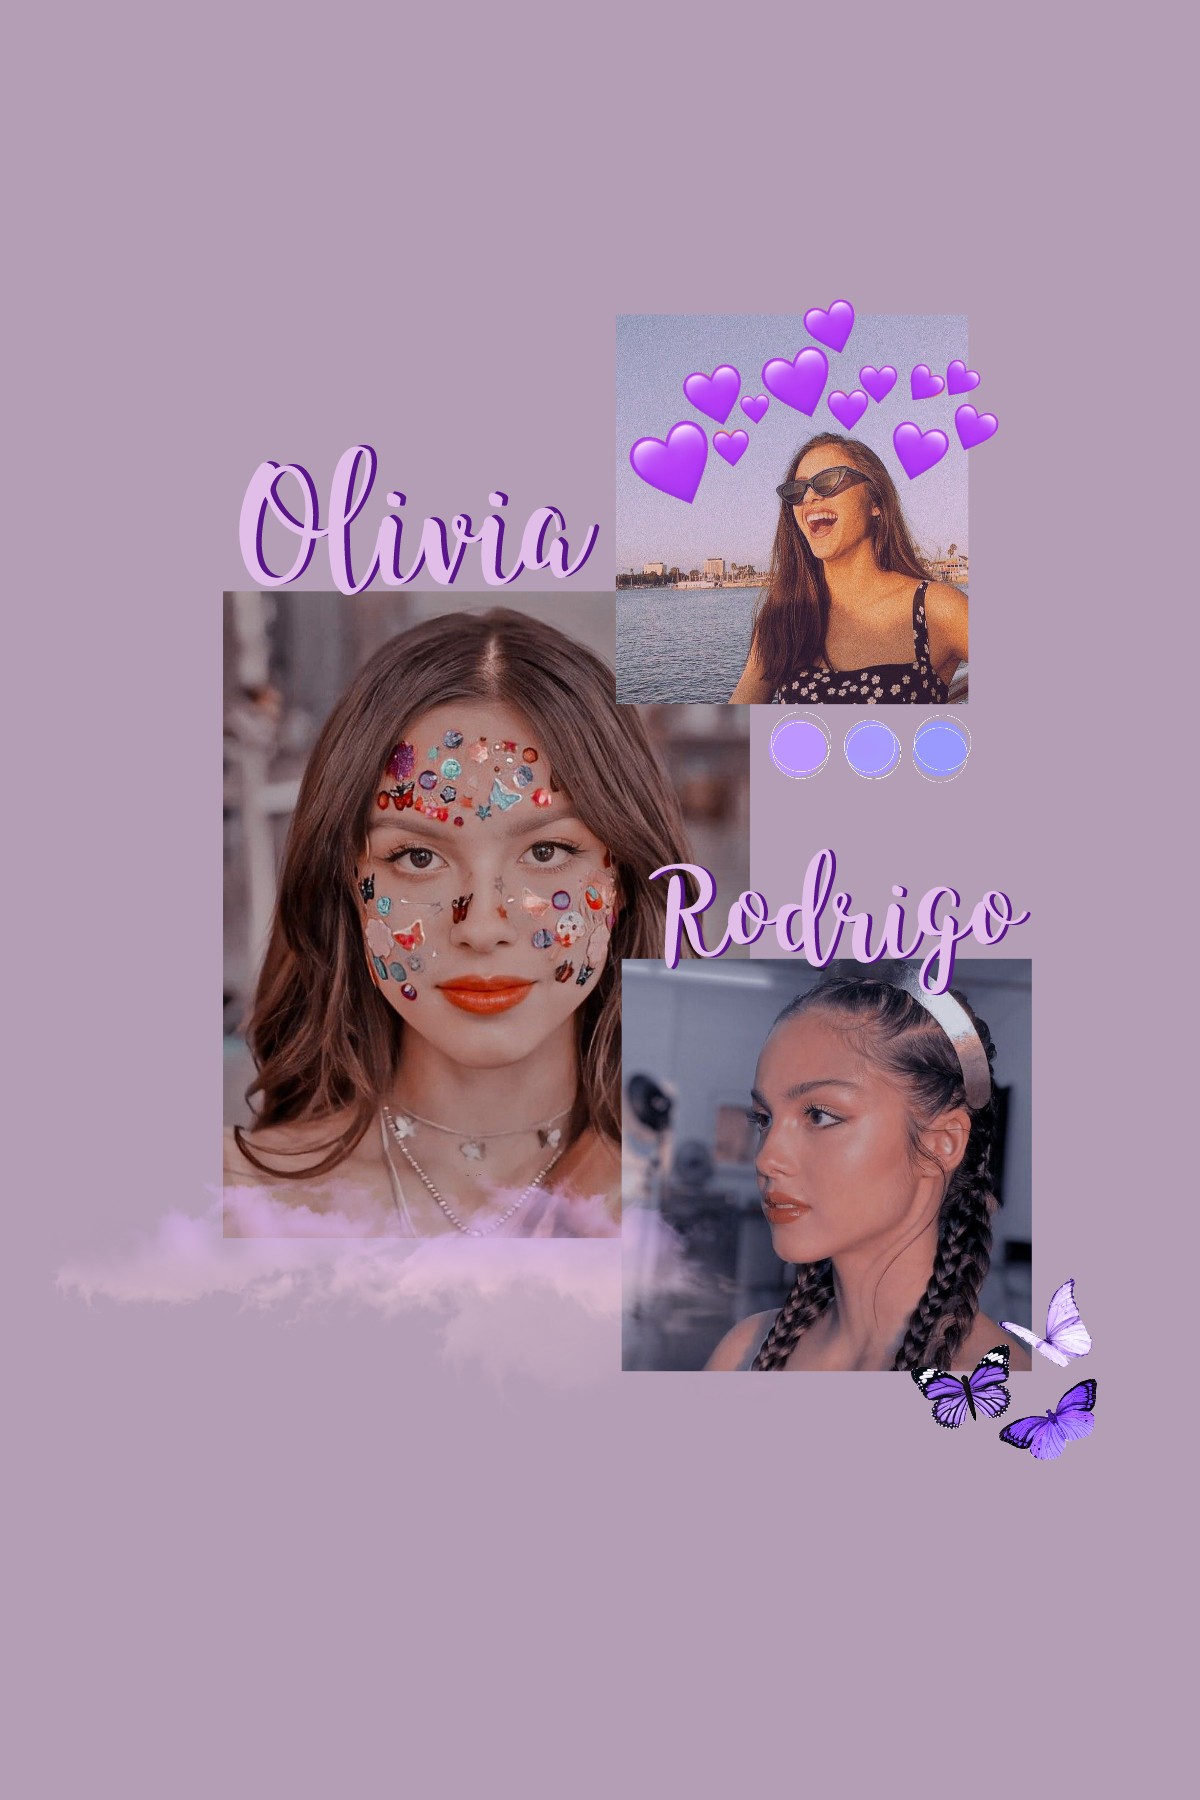 💜Tap💜
Just a basic olivia rodrigo collage, though it took me hours 😥
I hope it was worth it ☺